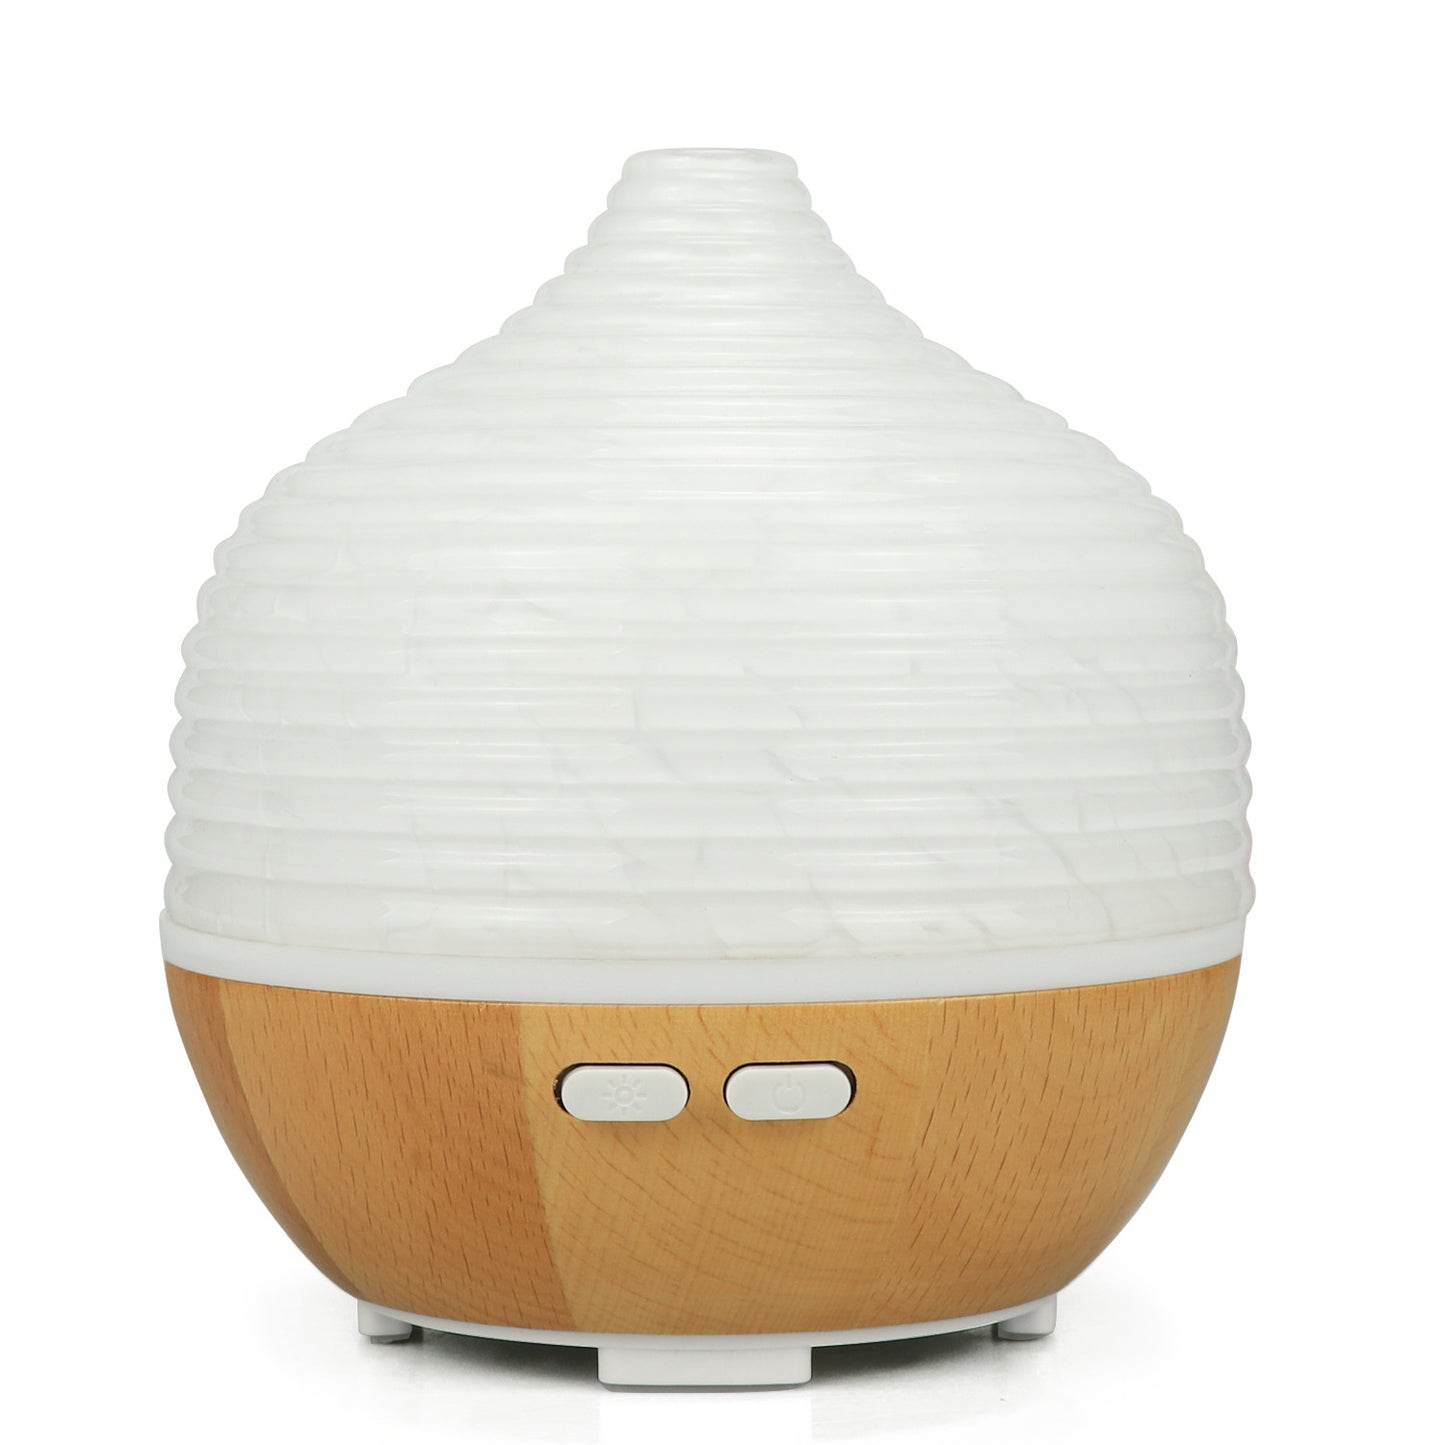 Spiral glass aromatherapy diffuser diffuser large capacity remote control ultrasonic aromatherapy humidifier